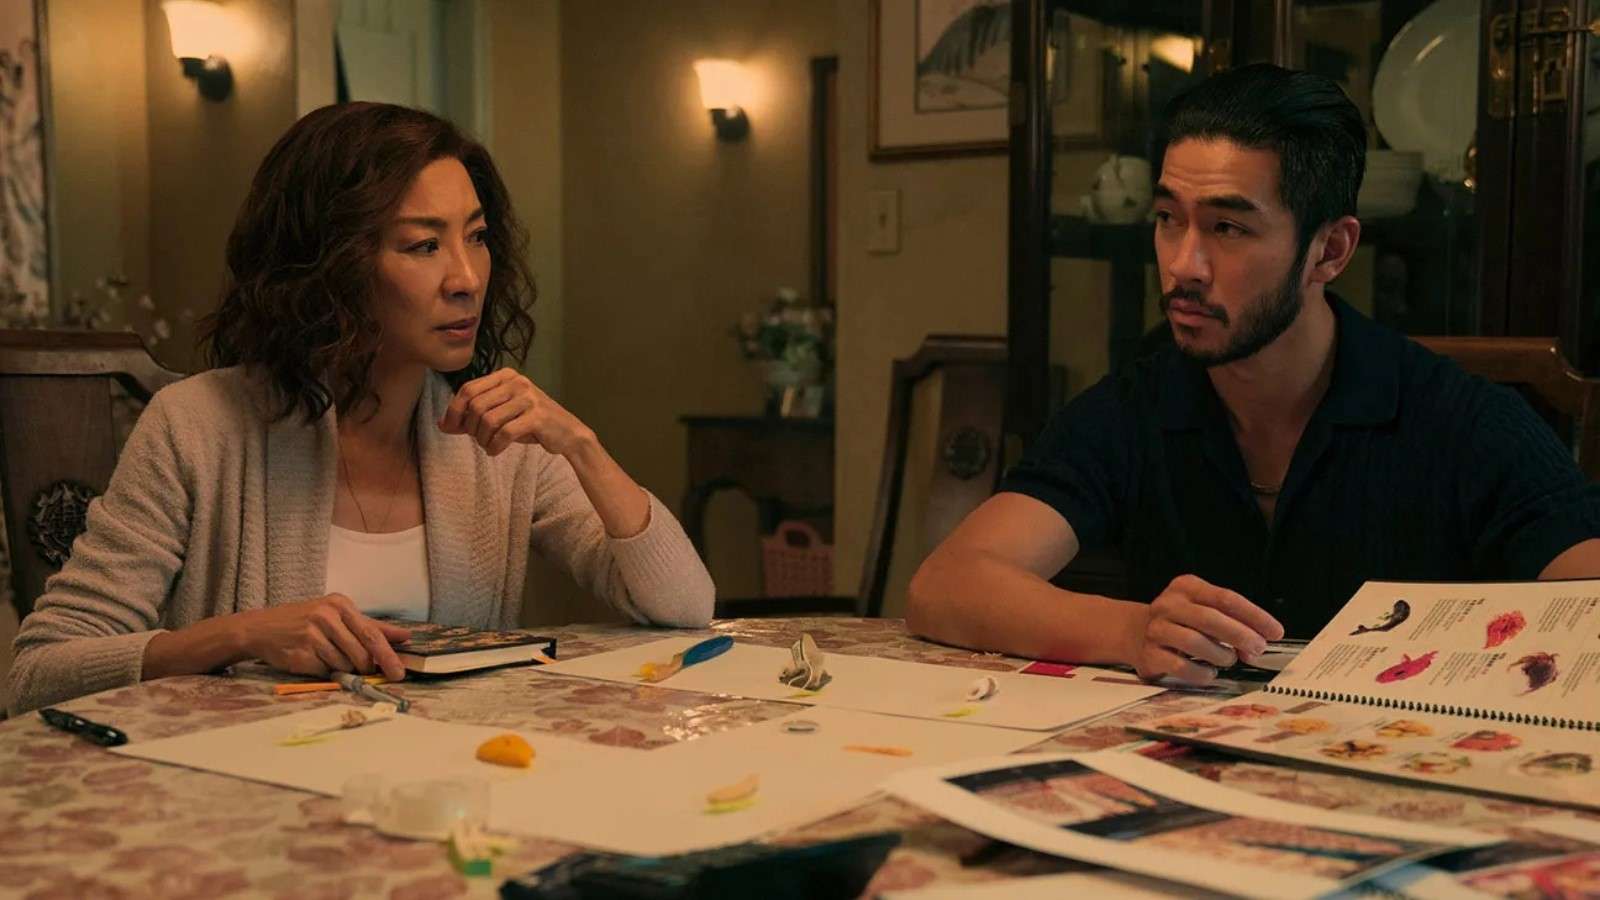 Michelle Yeoh as Eileen "Mama" Sun and Justin Chien as Charles Sun sitting at the table with papers in front of them